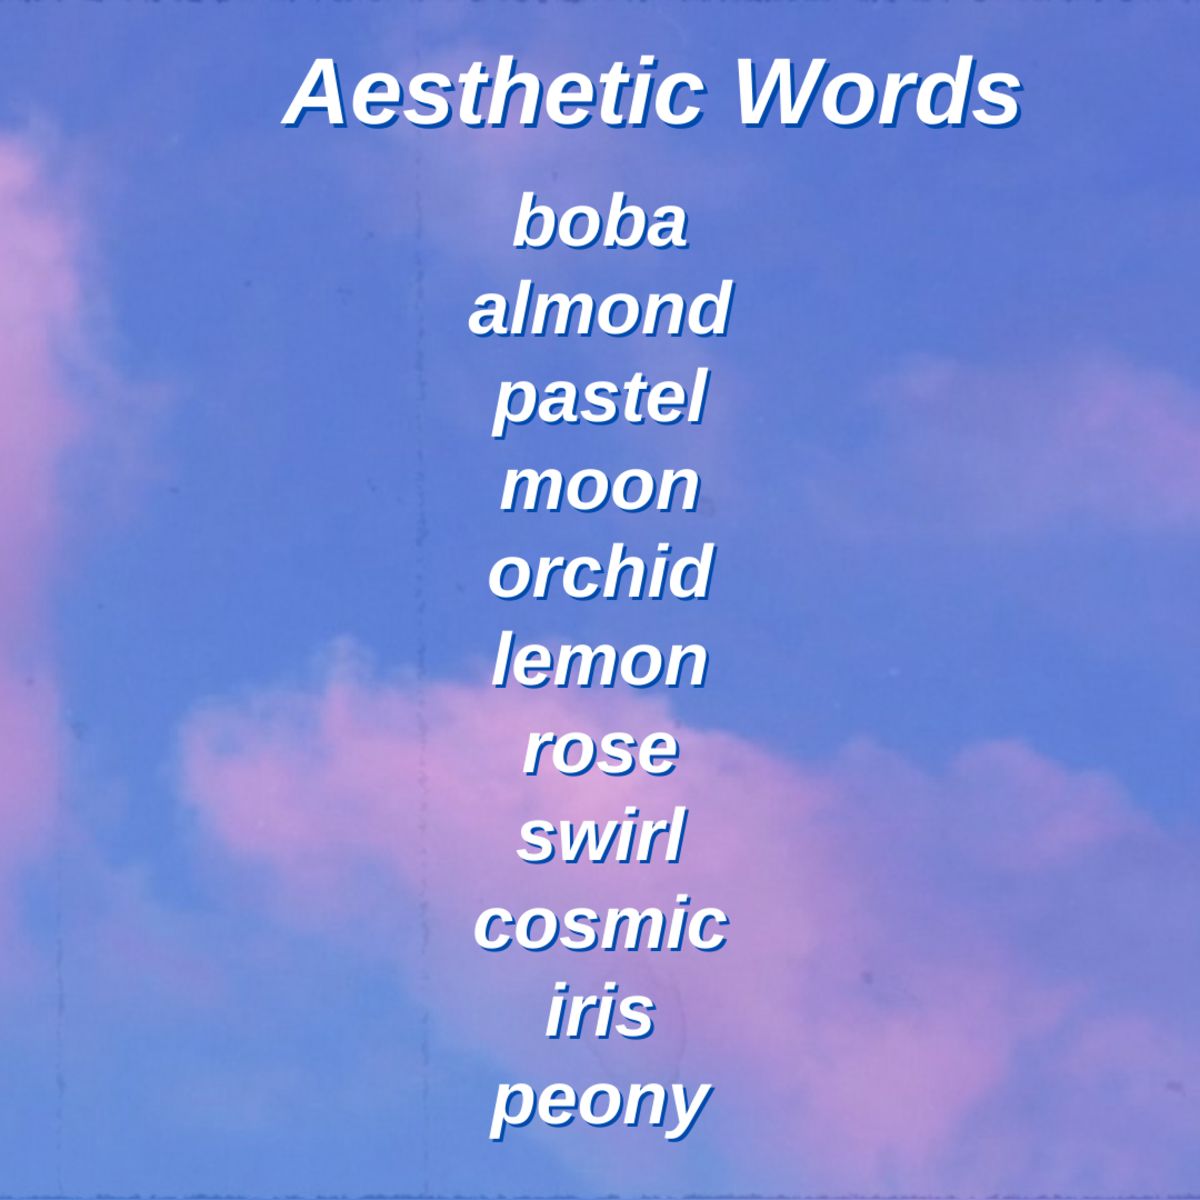 Here are even more aesthetic words to help inspire you!